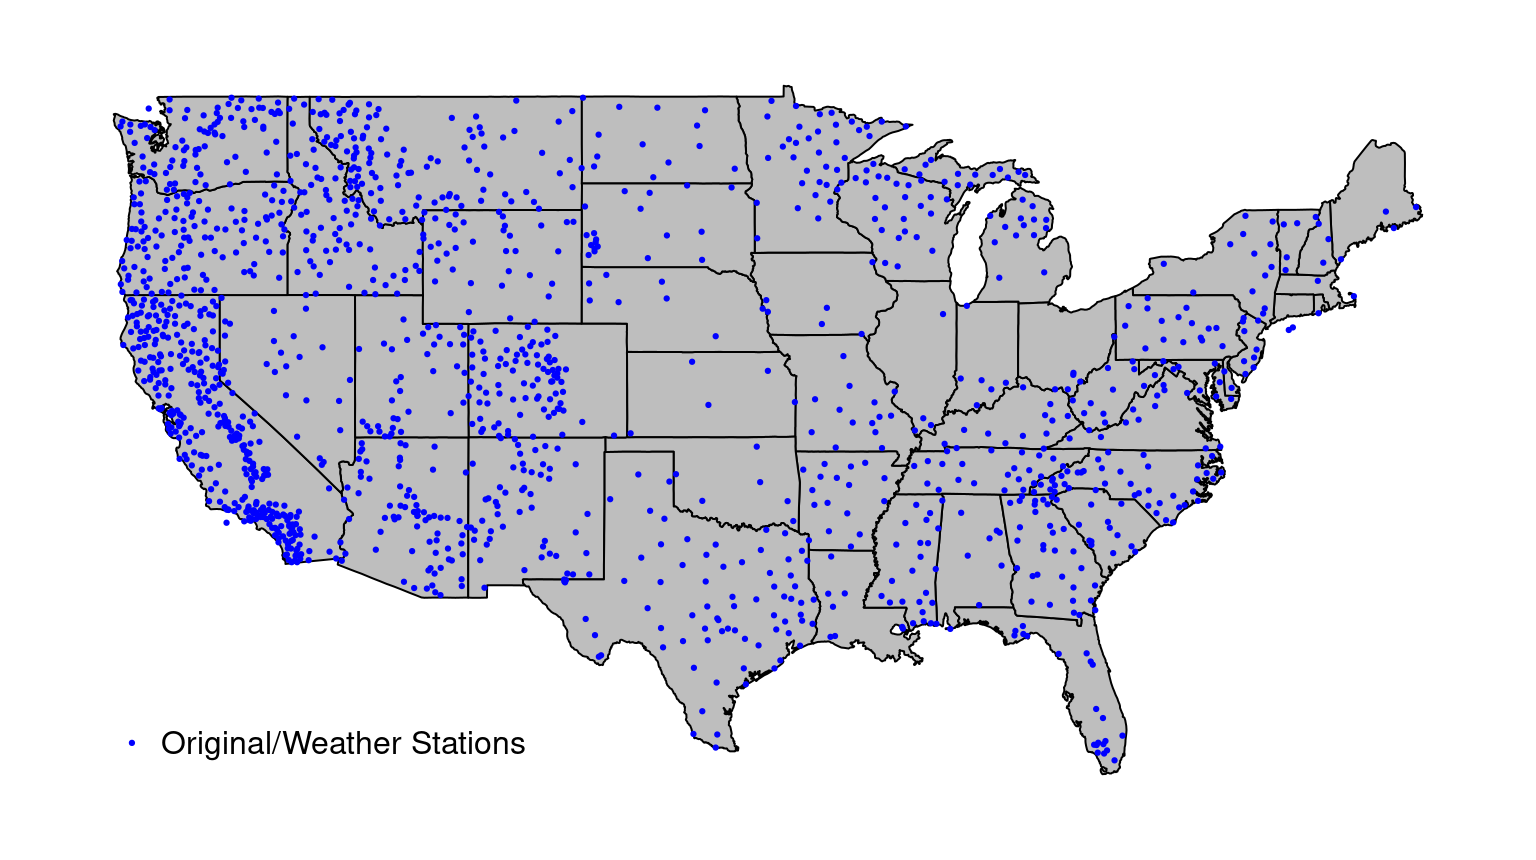 Weather station sites in the continental USA.